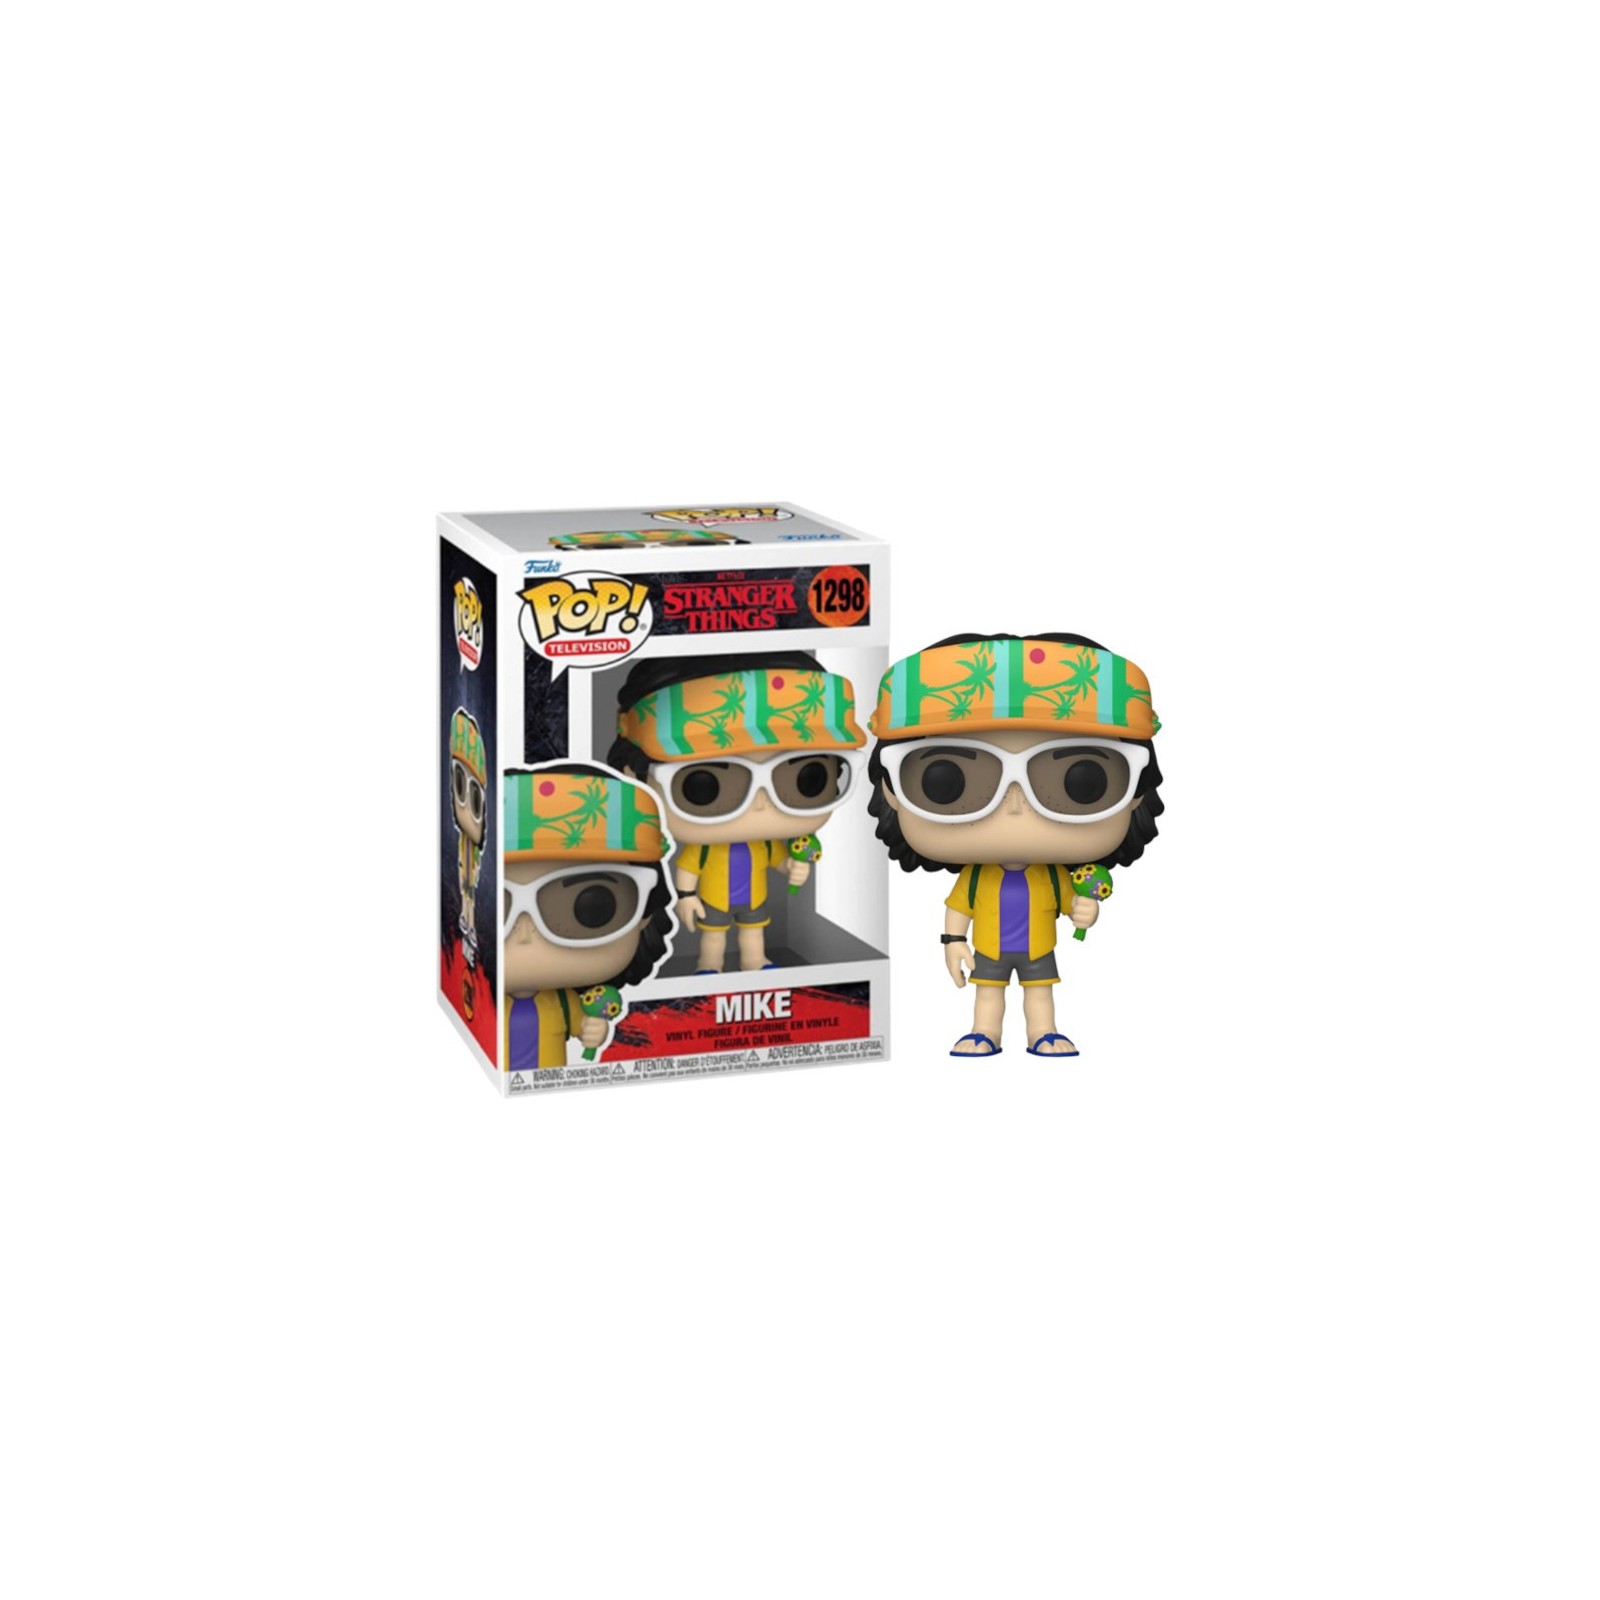 FUNKO POP! TELEVISION - STRANGER THINGS: MIKE (1298)